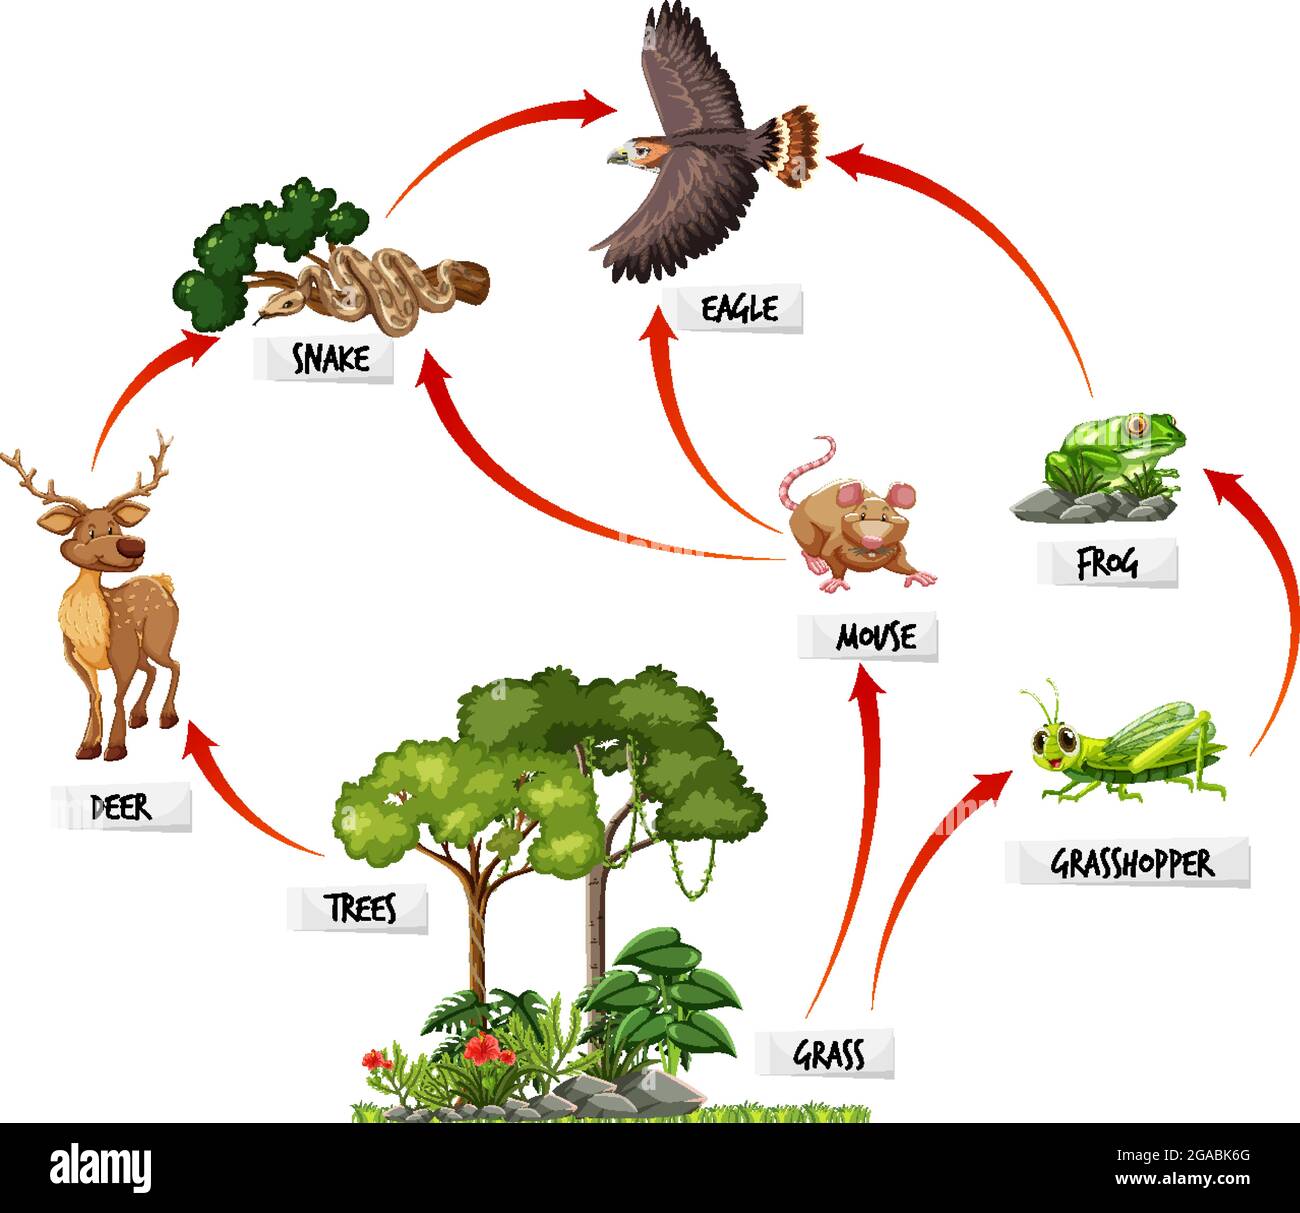 Diagram showing food web in the rainforest illustration Stock Vector